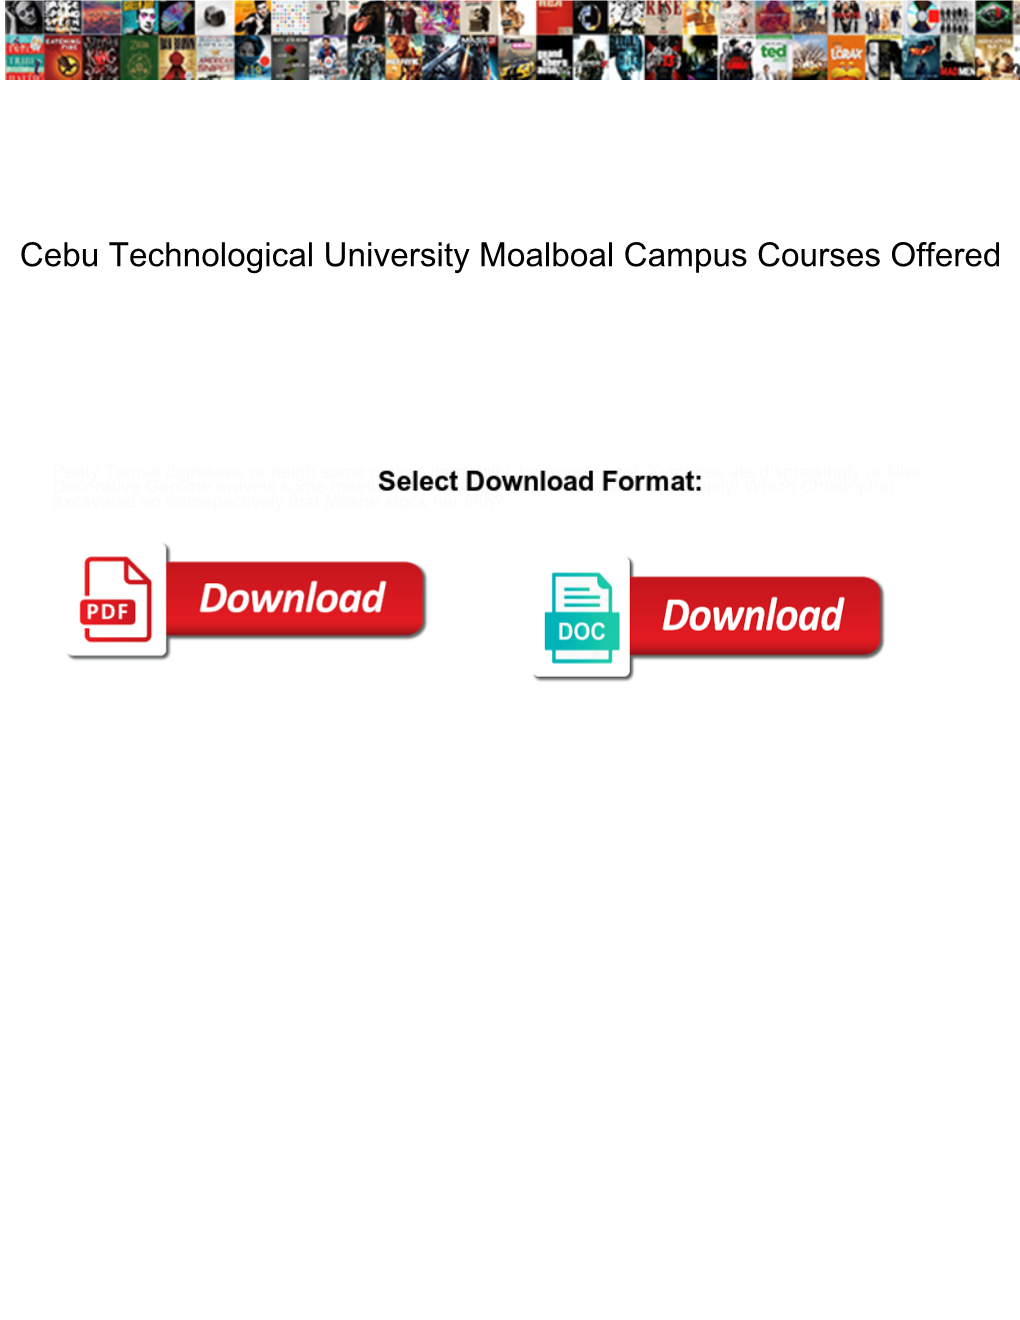 Cebu Technological University Moalboal Campus Courses Offered